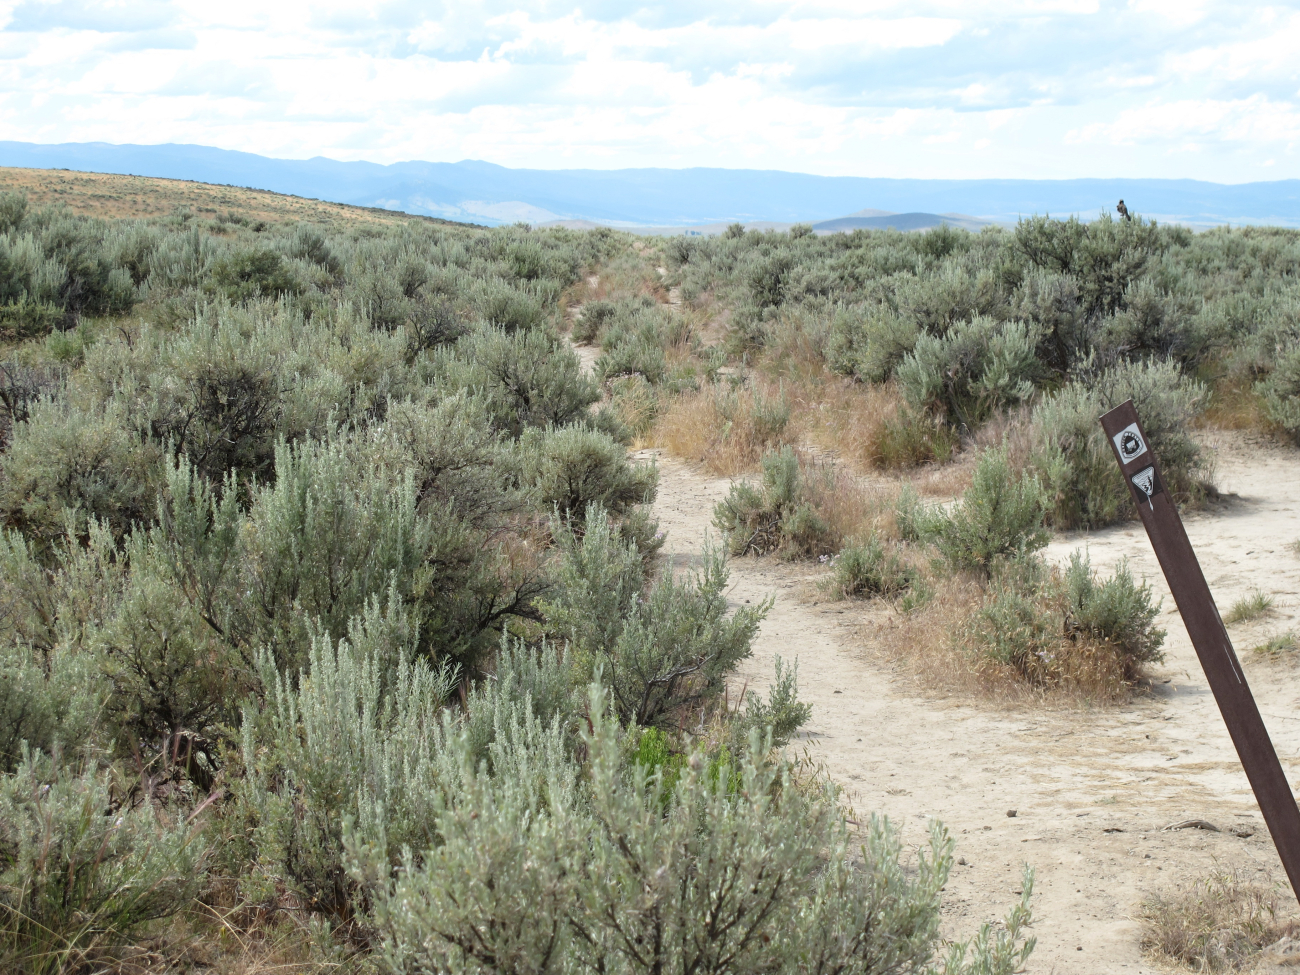 On the approach ot Baker City, ruts from wagons traveling along the Oregon Trail in the 1840's are still visible